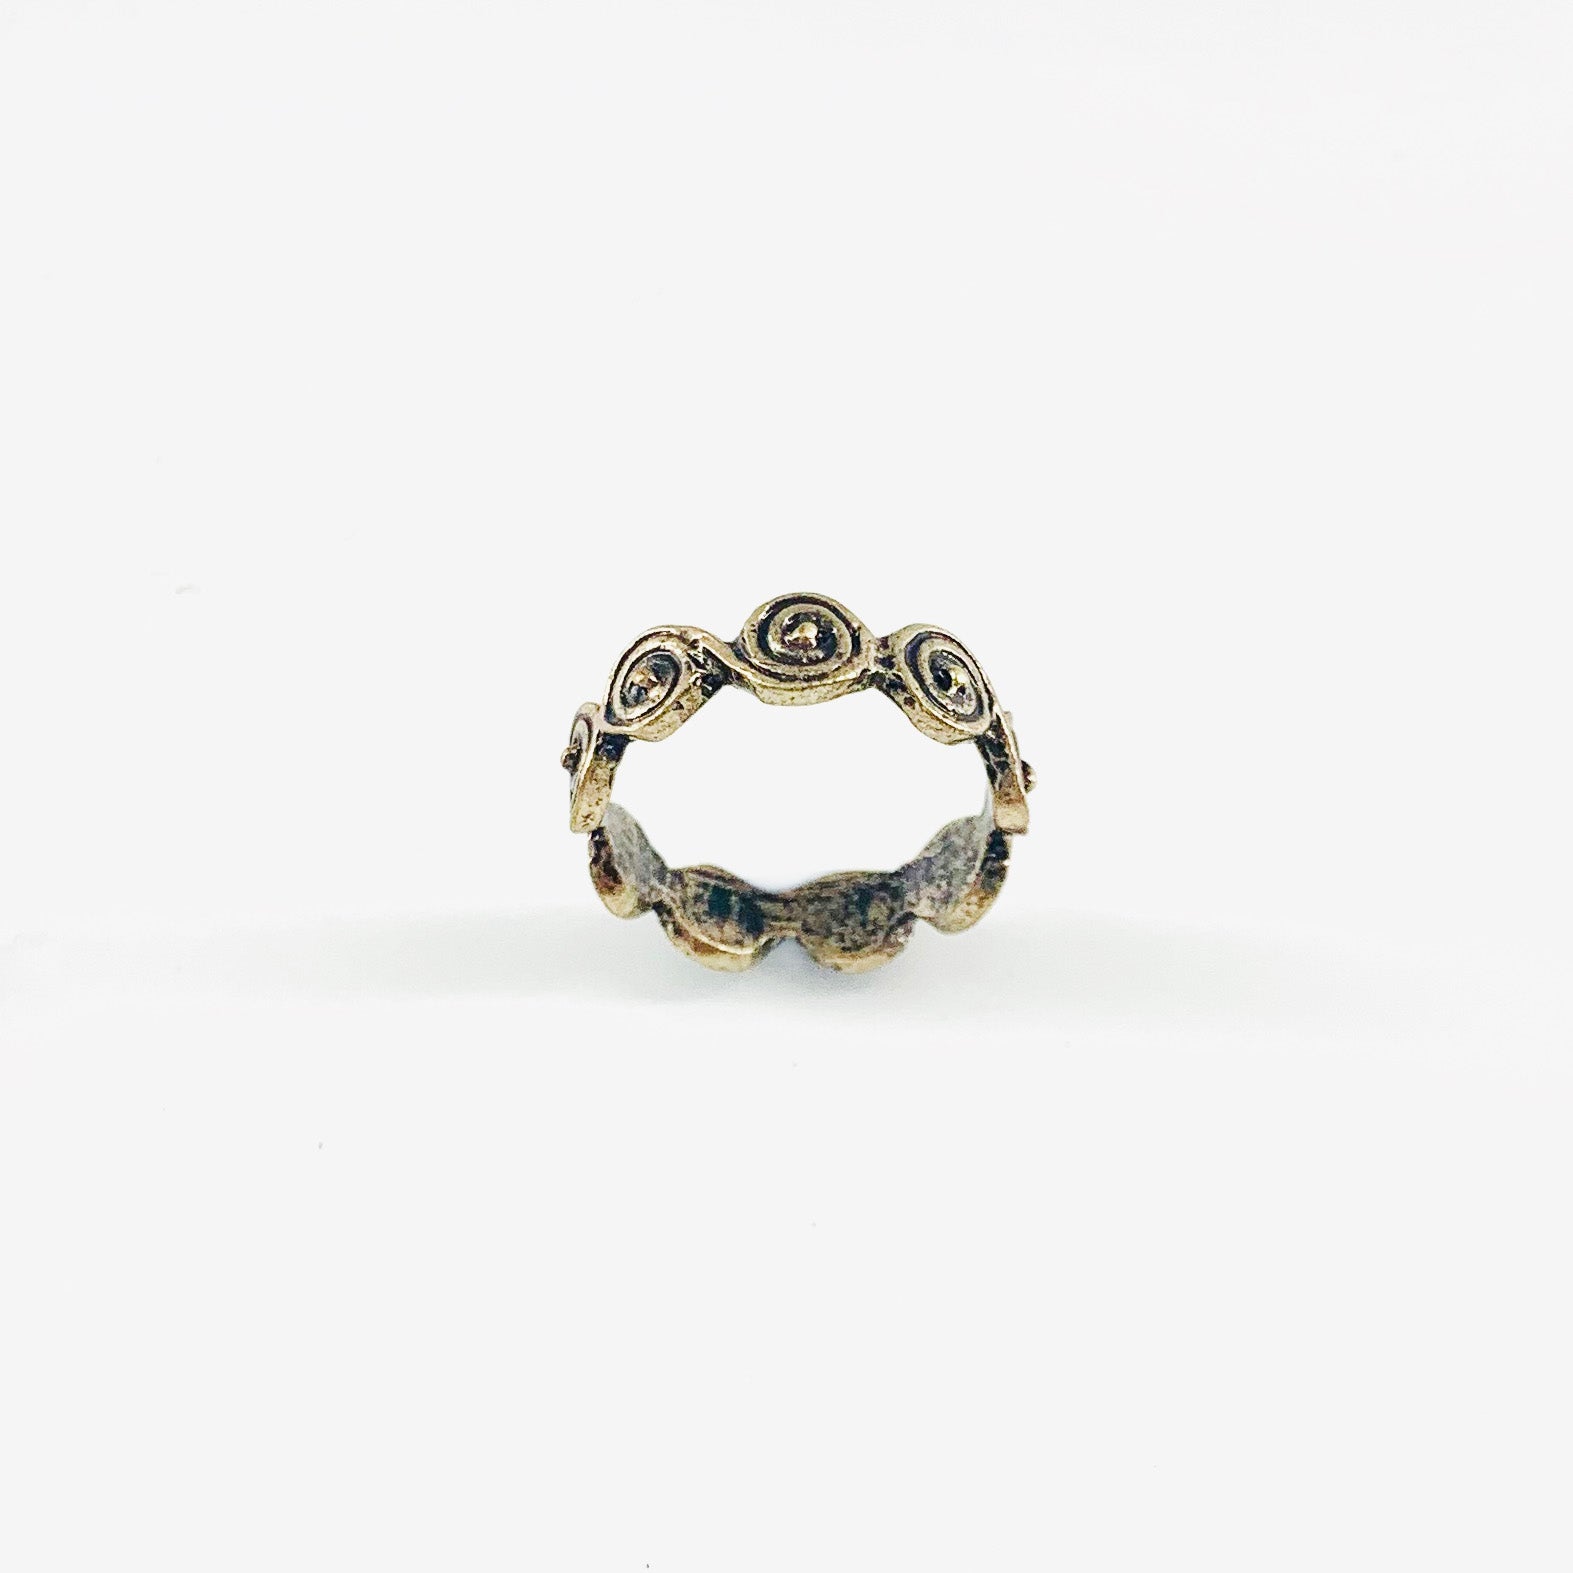 Vintage-styled ring with circular design patterns